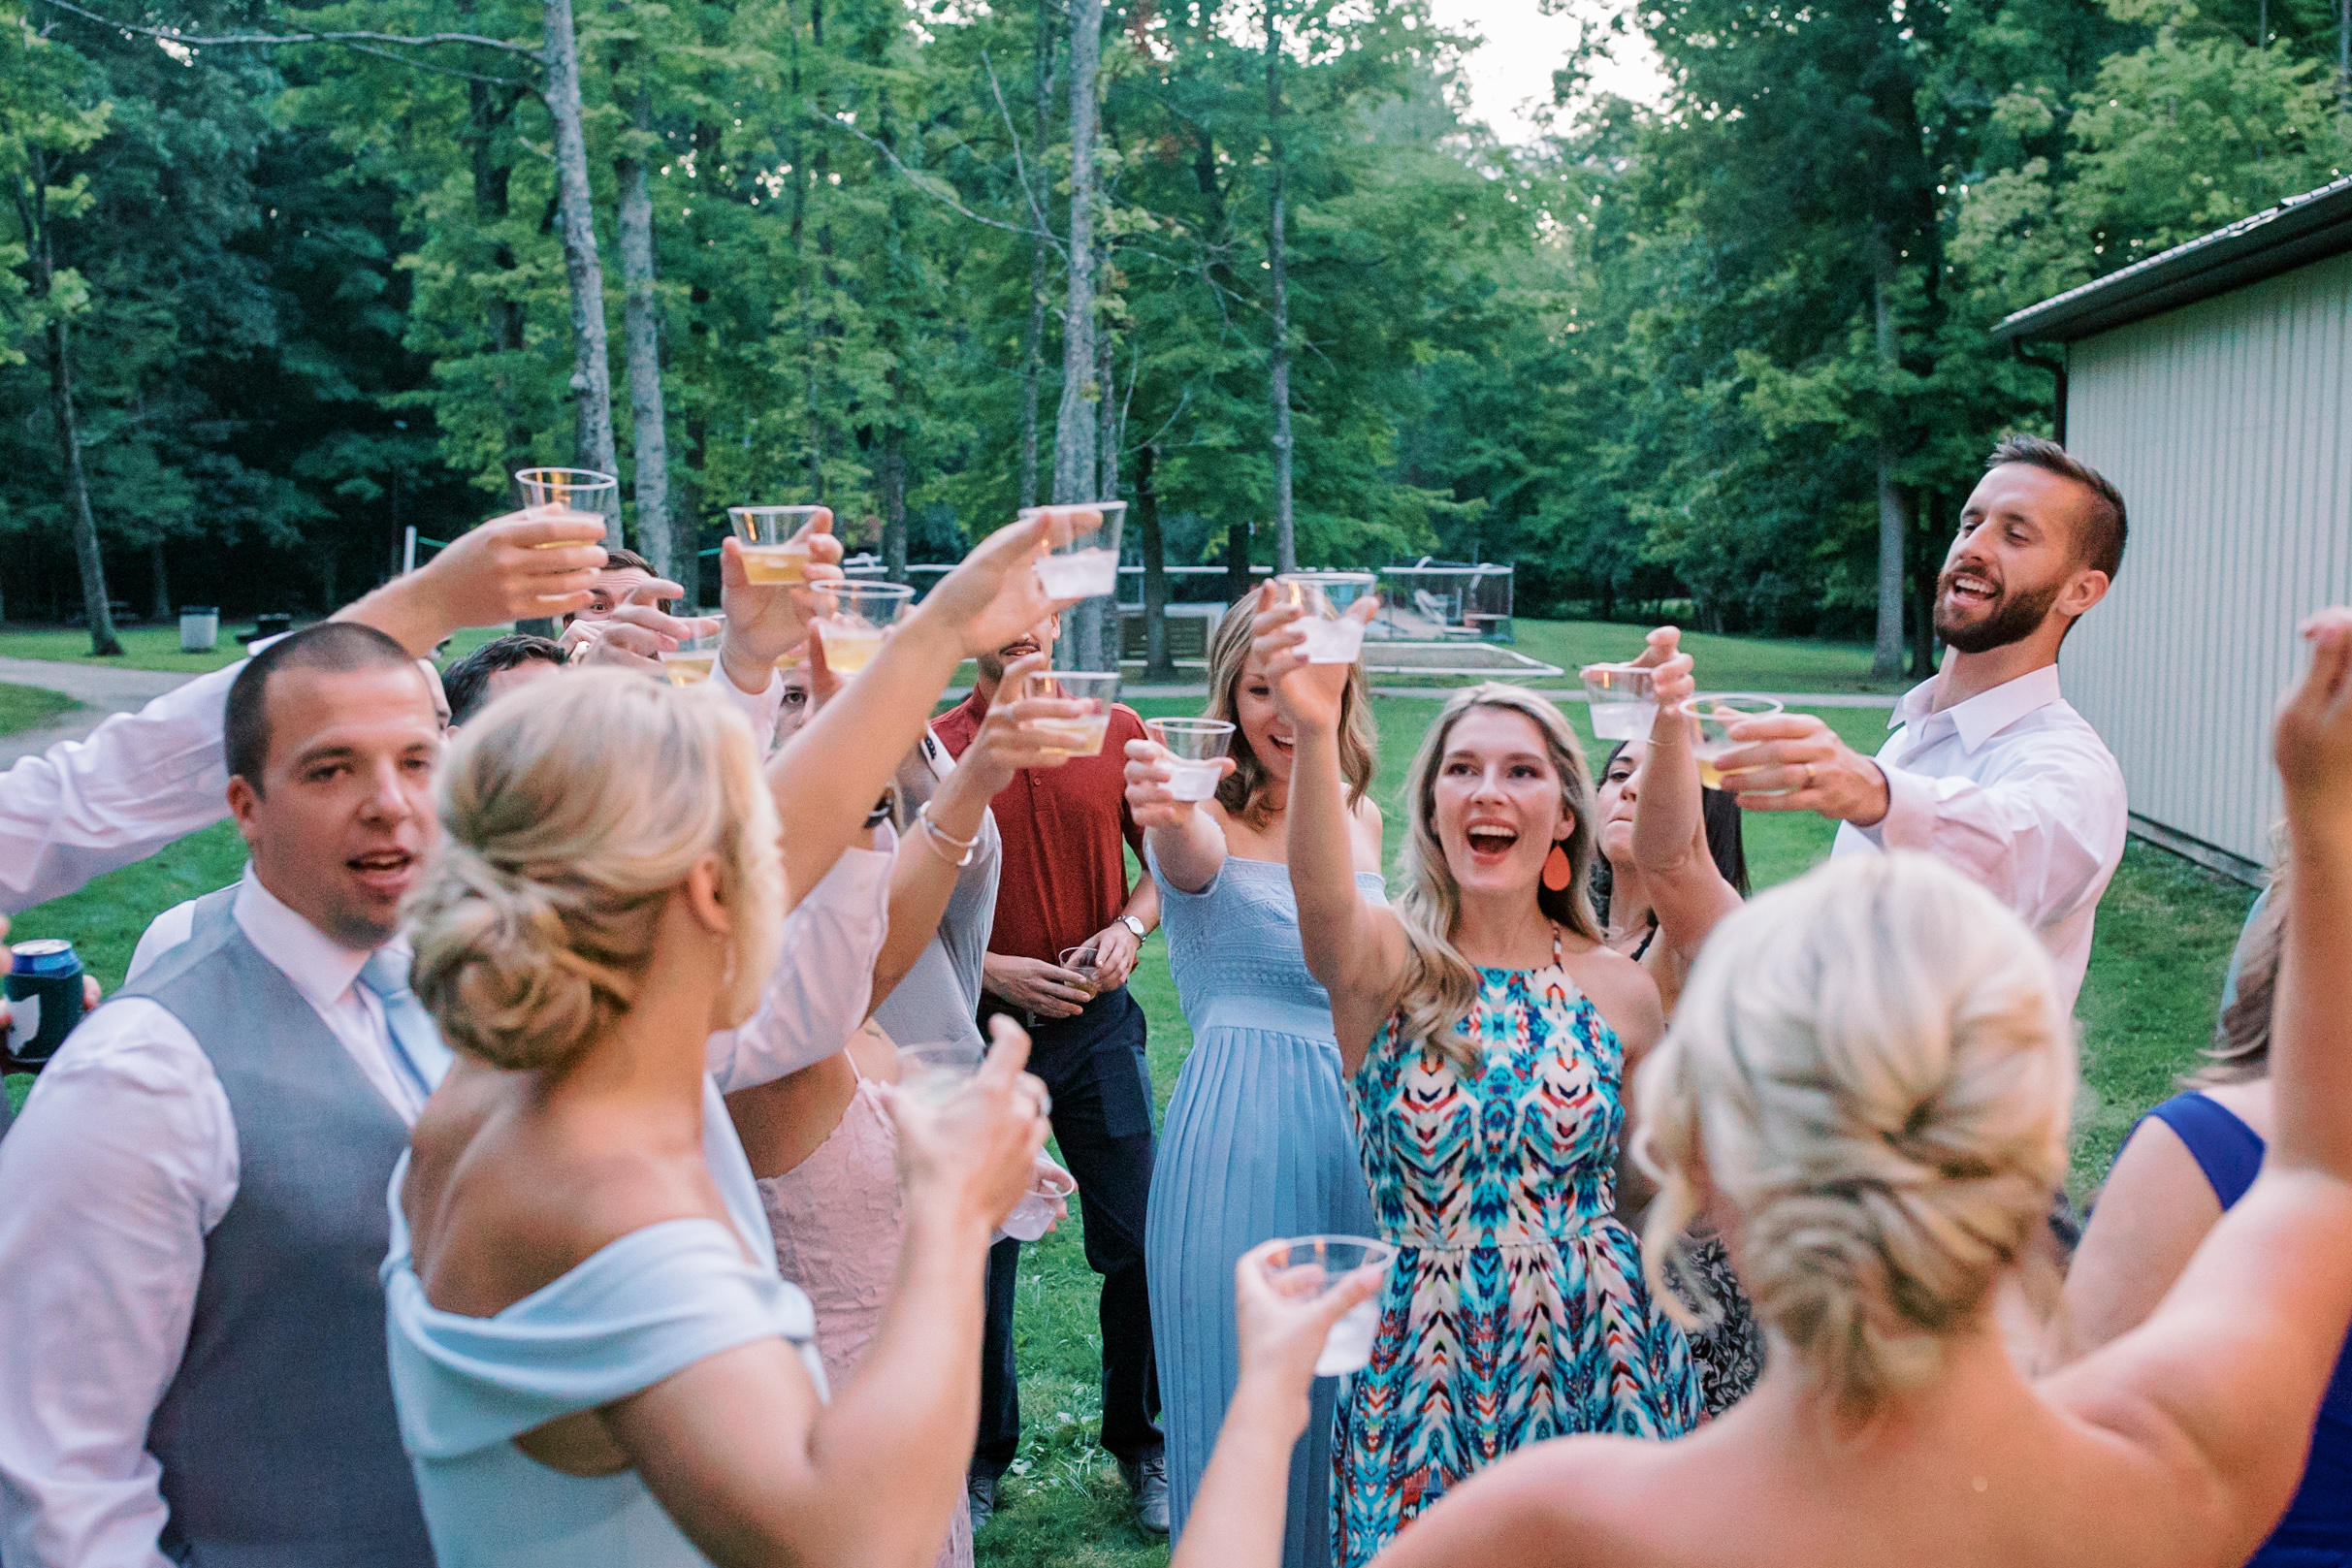 Cheers to keeping your wedding venue affordable